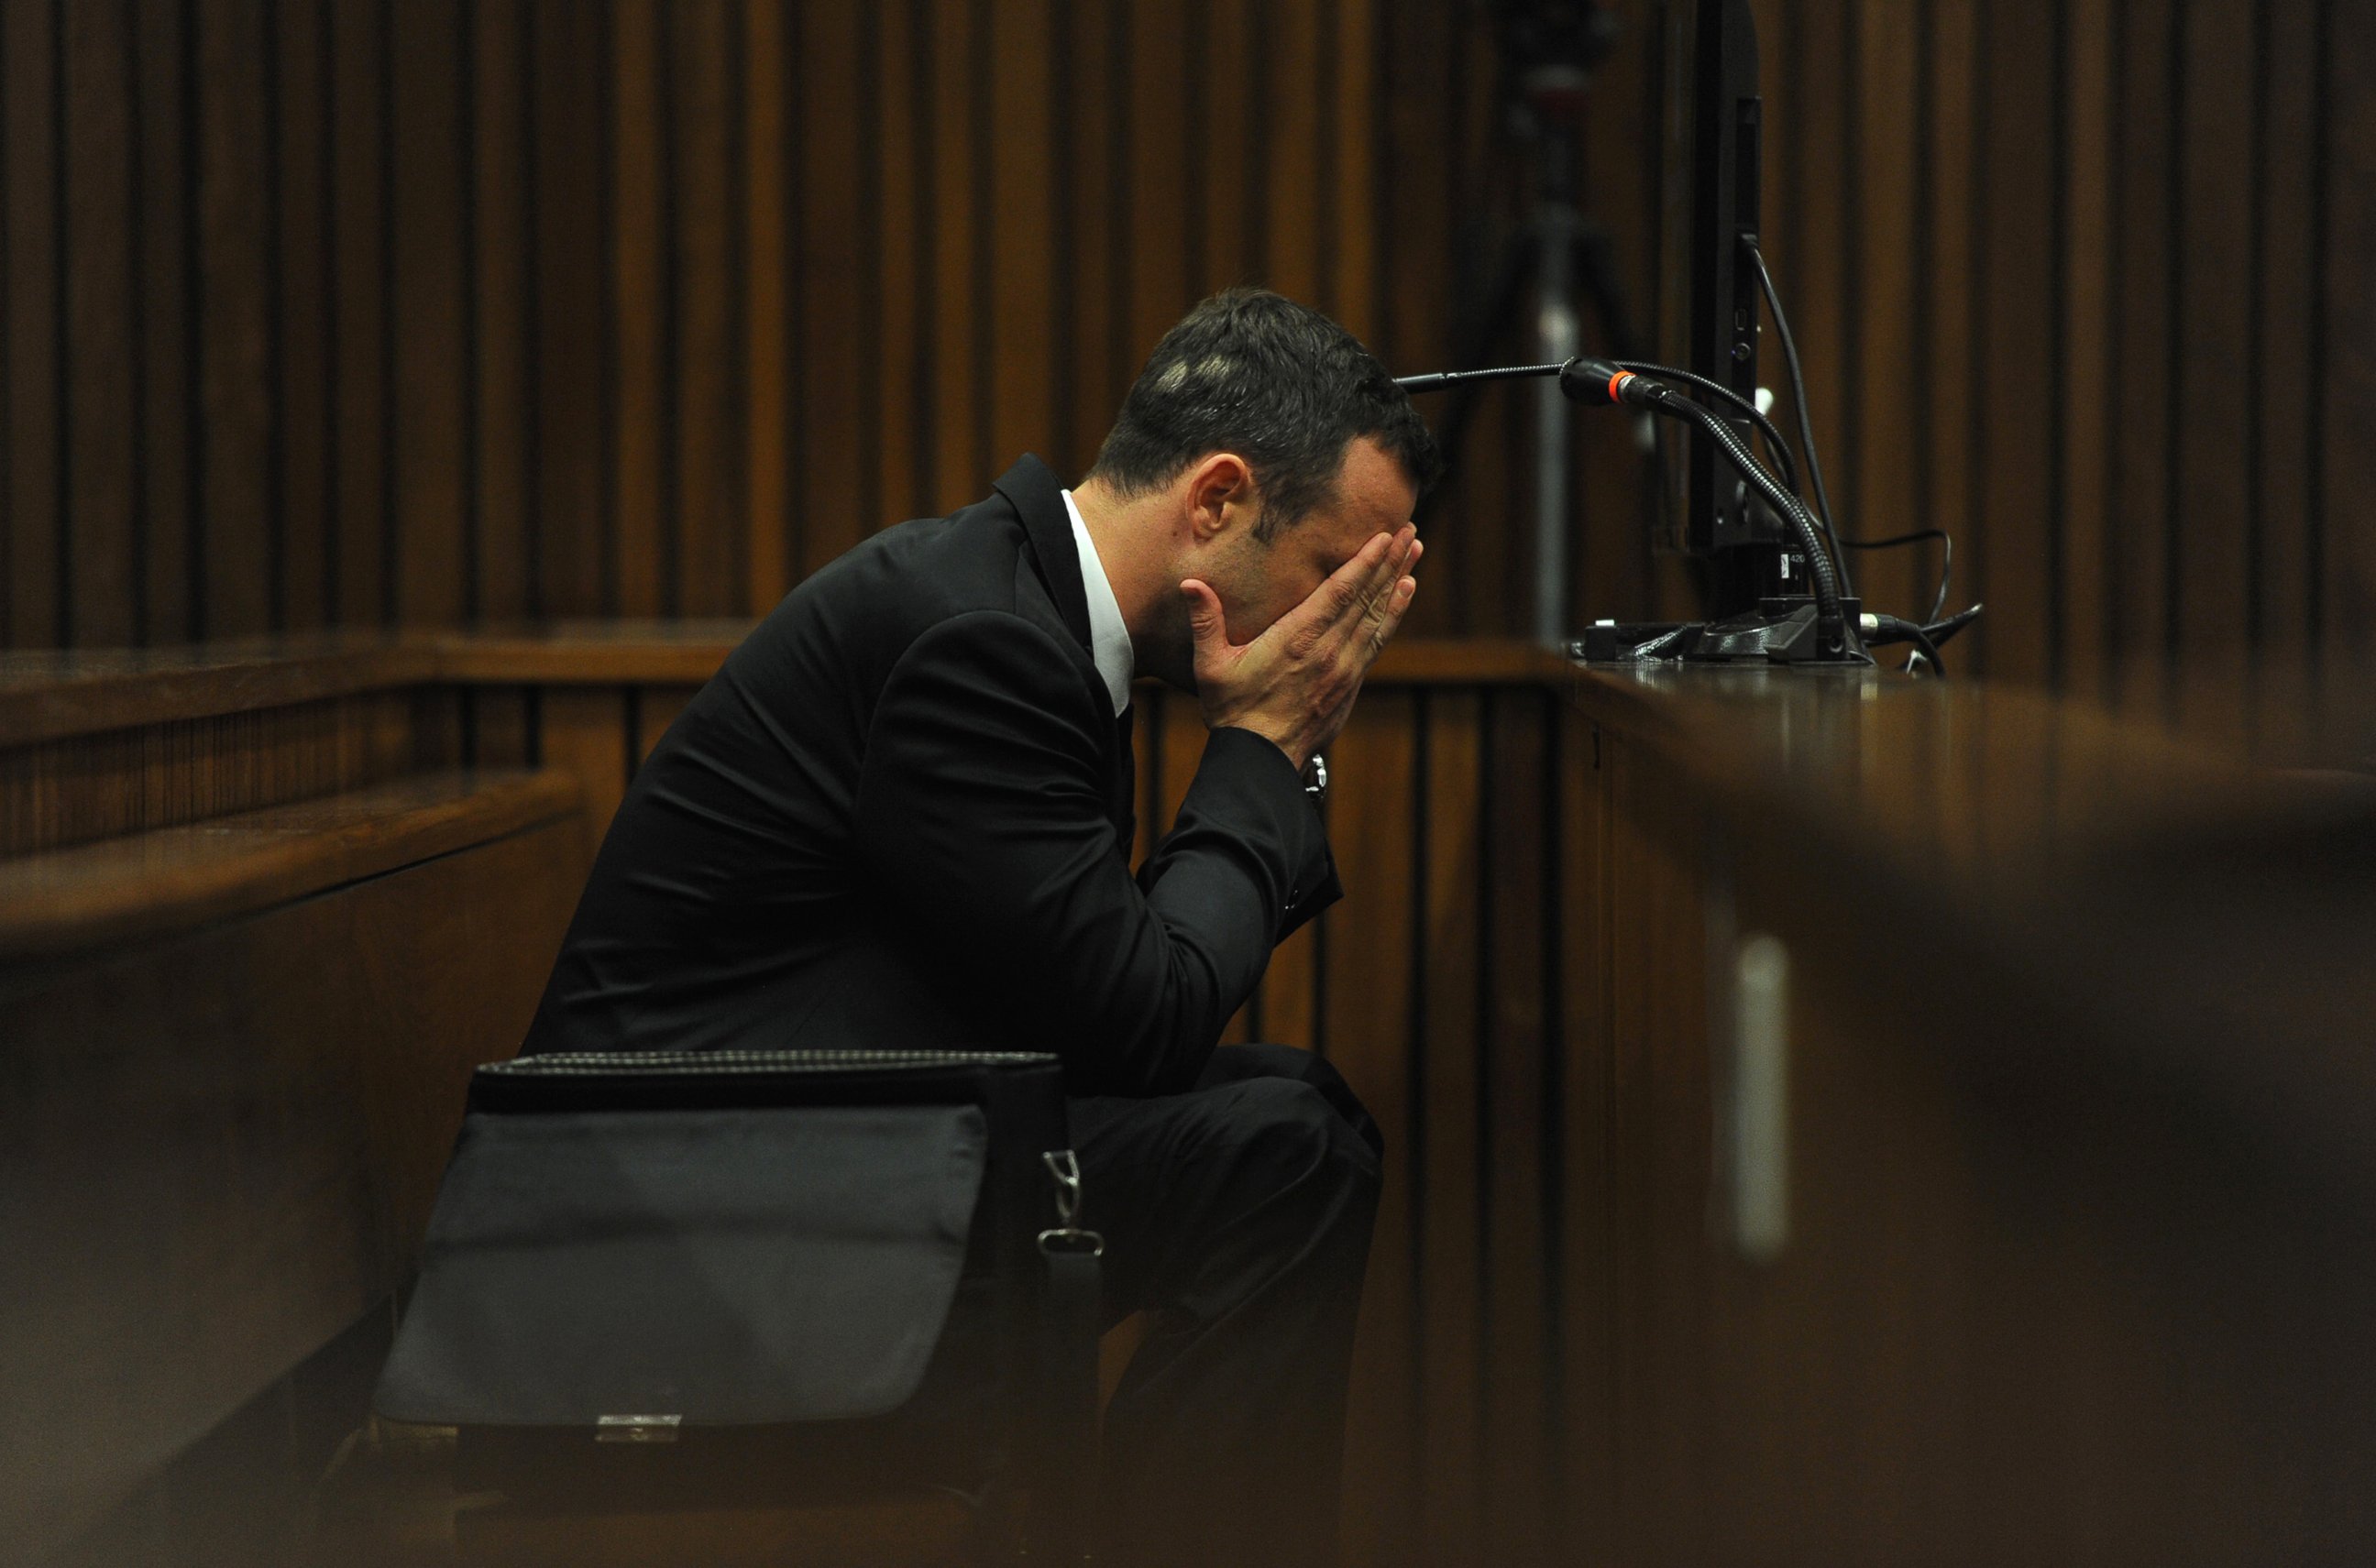 PHOTO: Oscar Pistorius listens to evidence from a witness speaking about the morning of the shooting of his girlfriend Reeva Steenkamp on the fourth day of his trial at the high court in Pretoria, South Africa, March 6, 2014.  